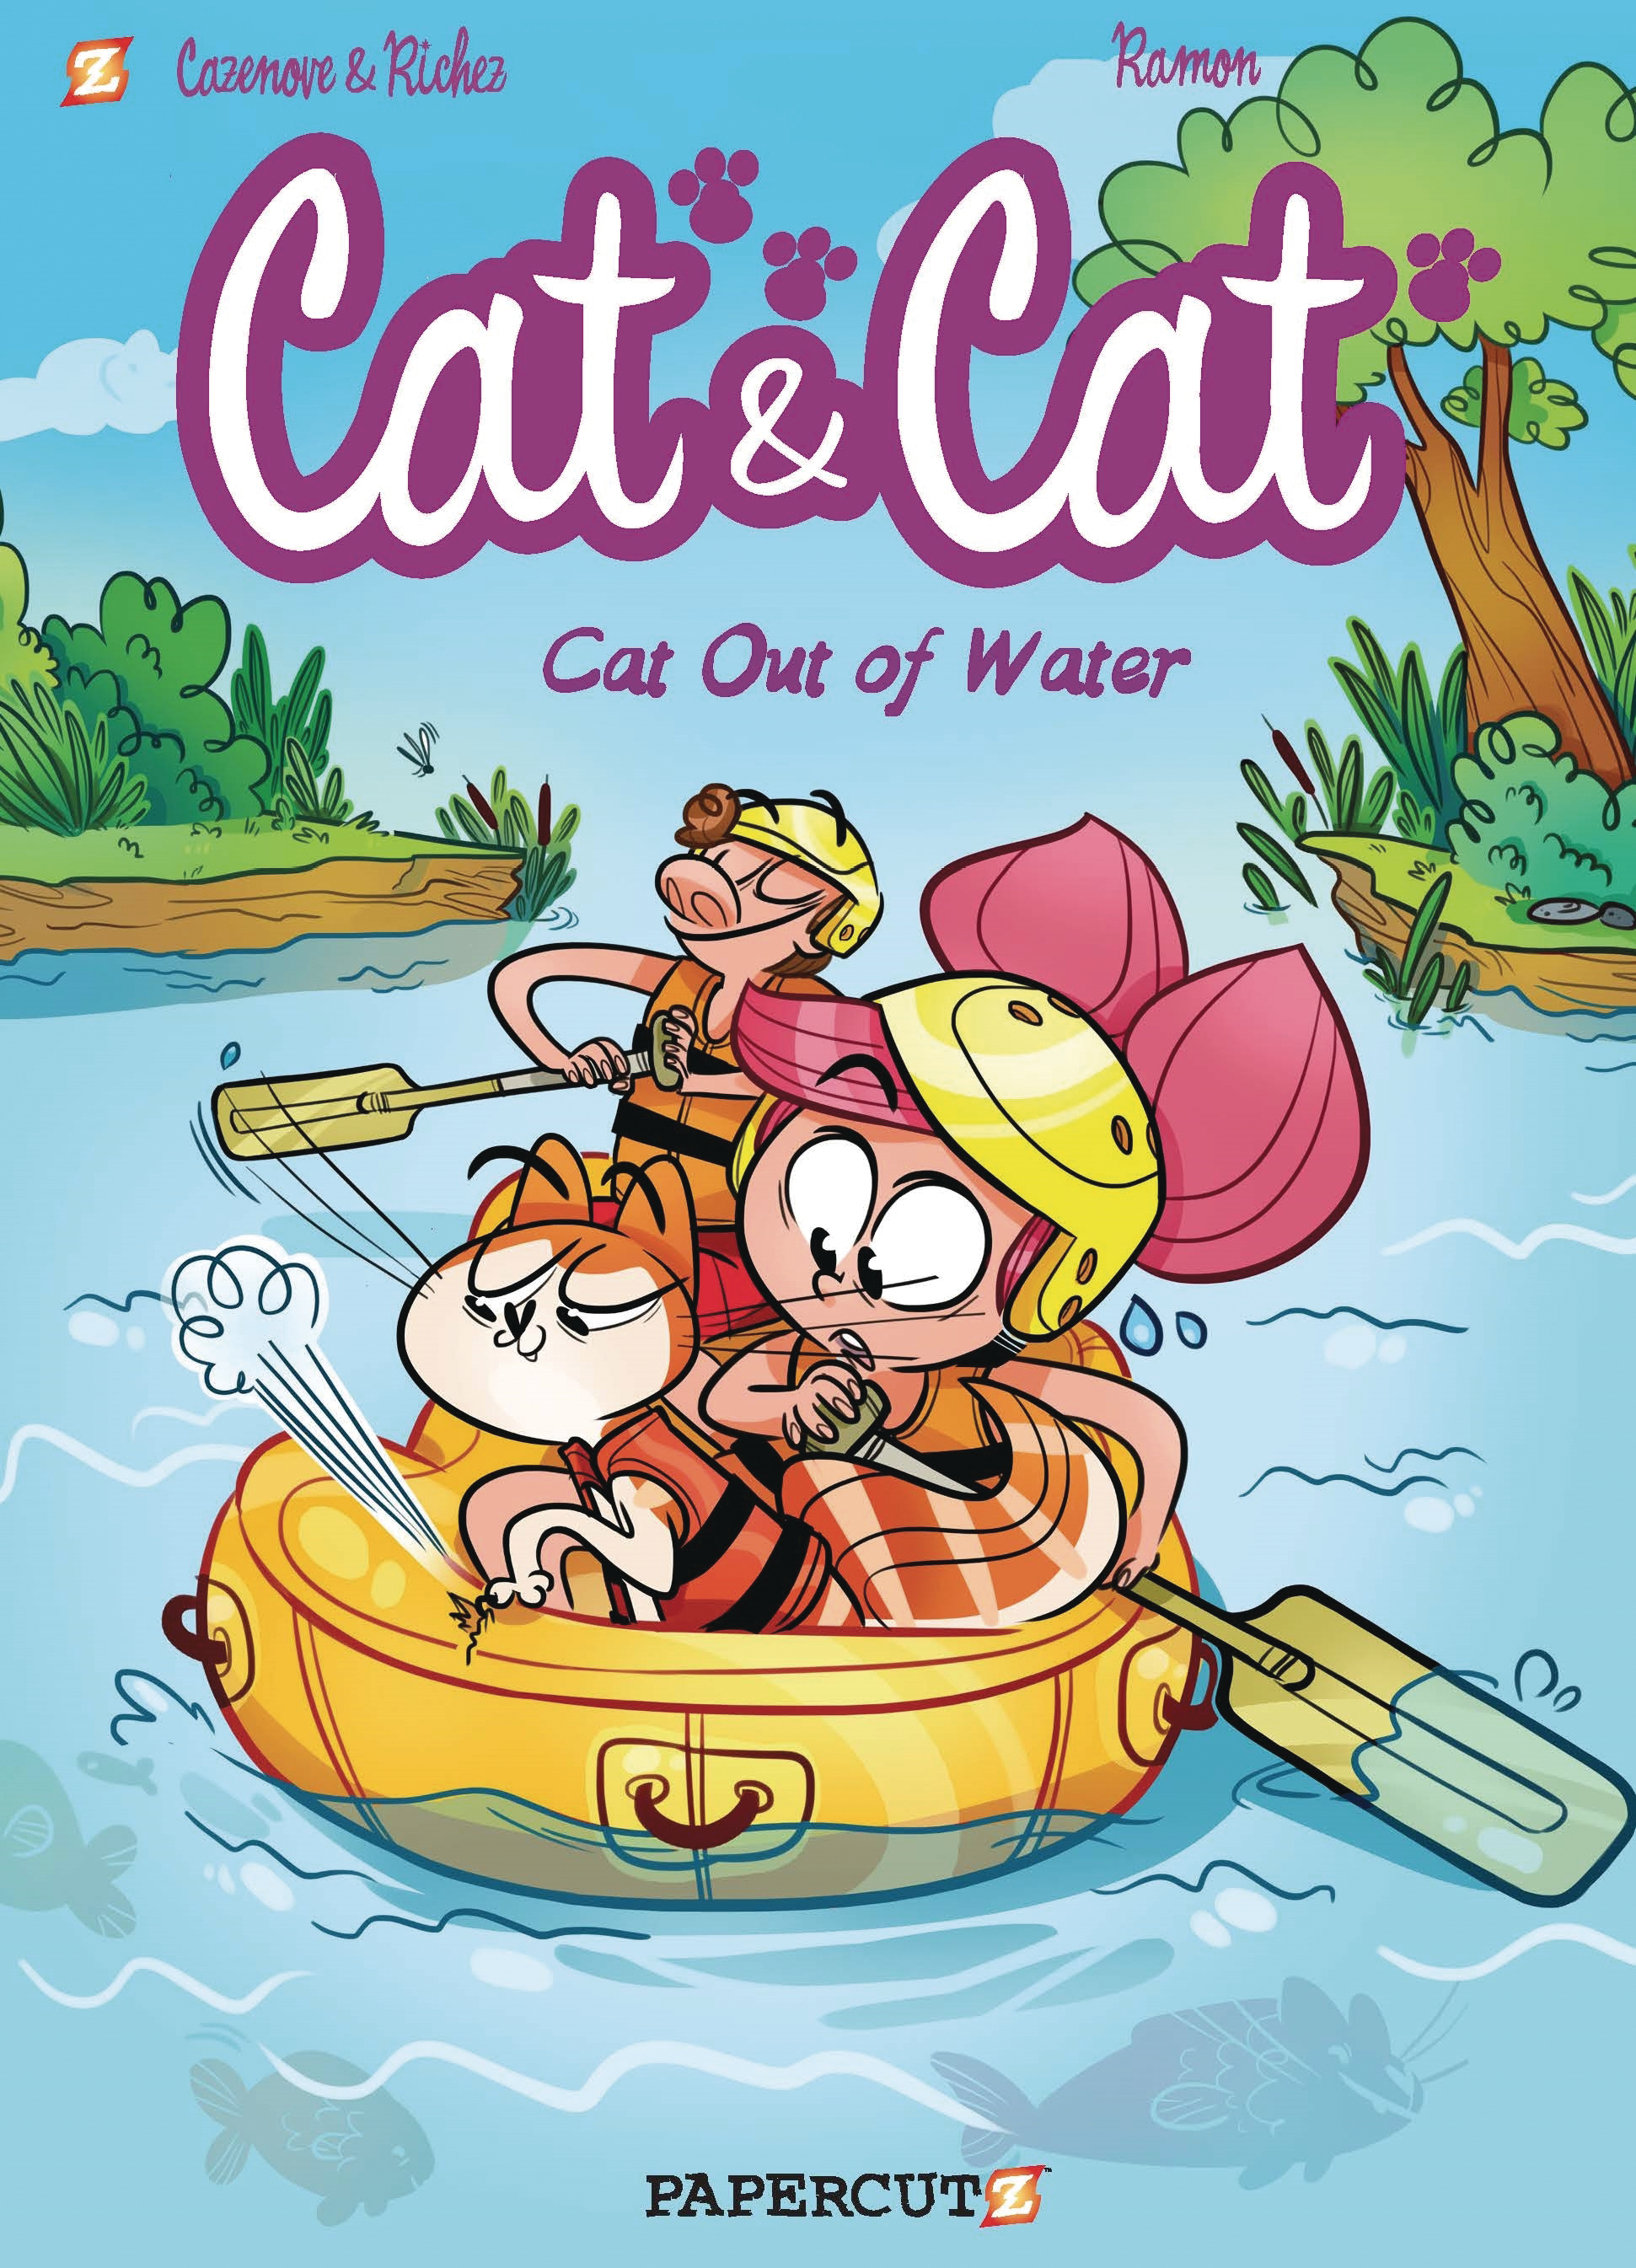 Cat & Cat Graphic Novel Volume 2 Cat Out of Water